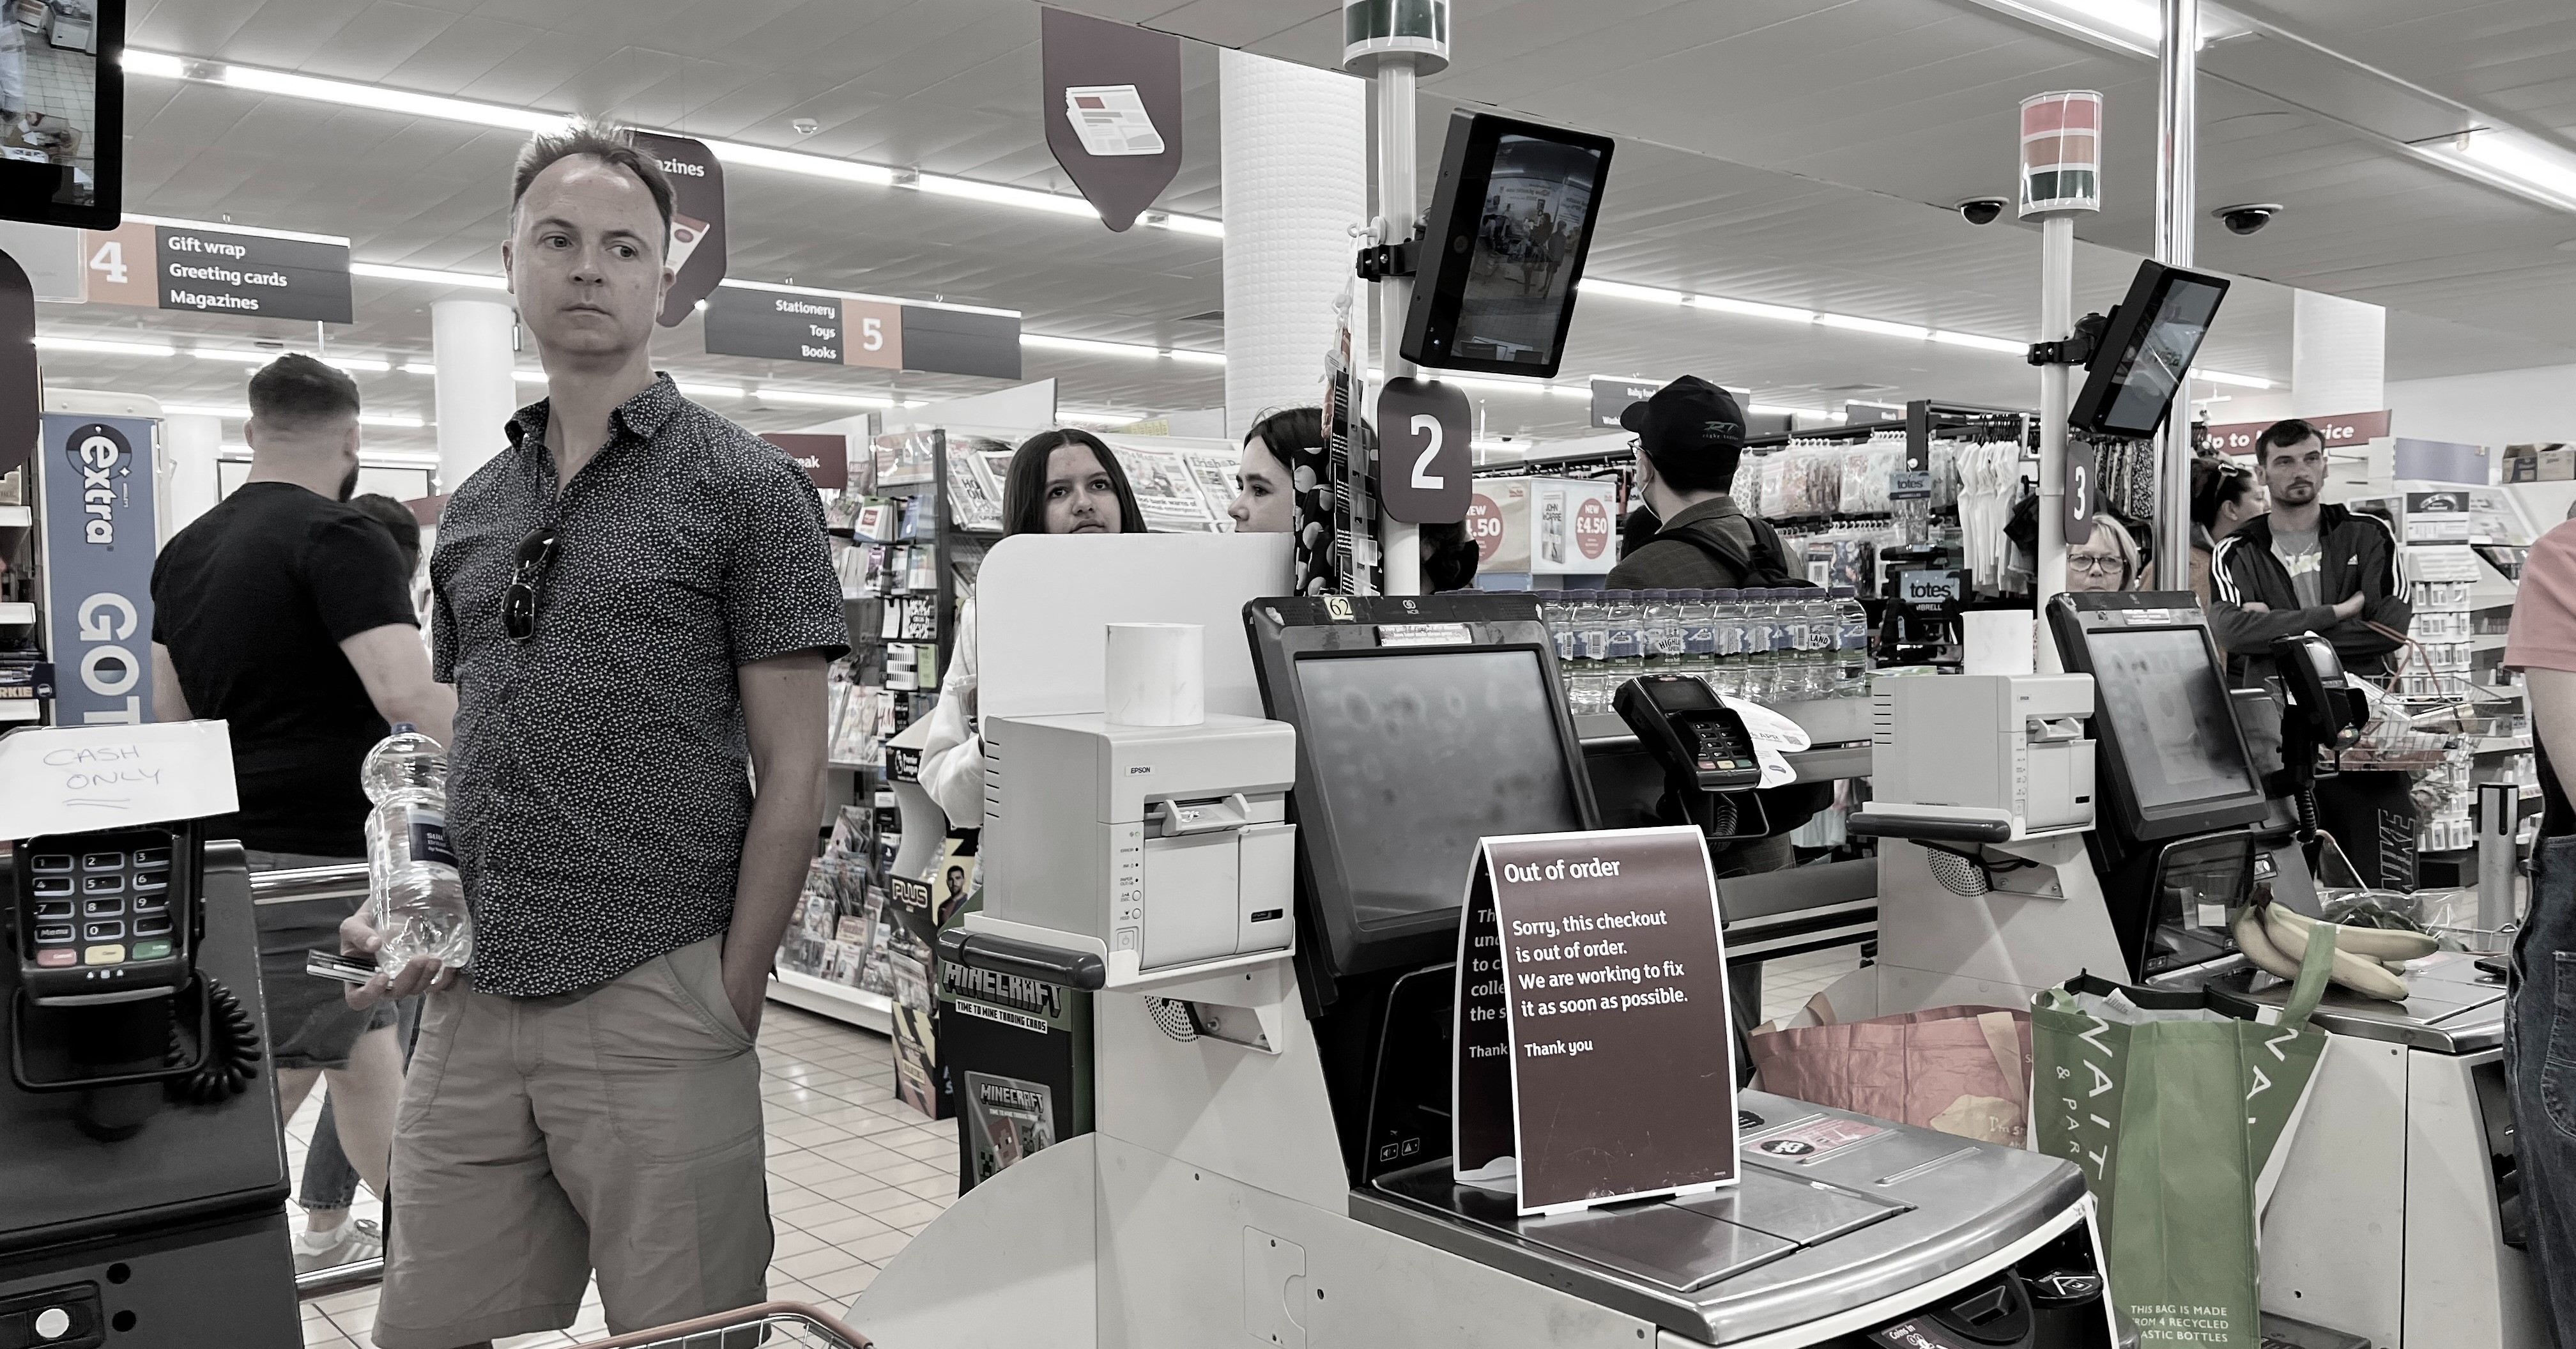 Has self-checkout only increased the level of frustration experienced by shoppers?